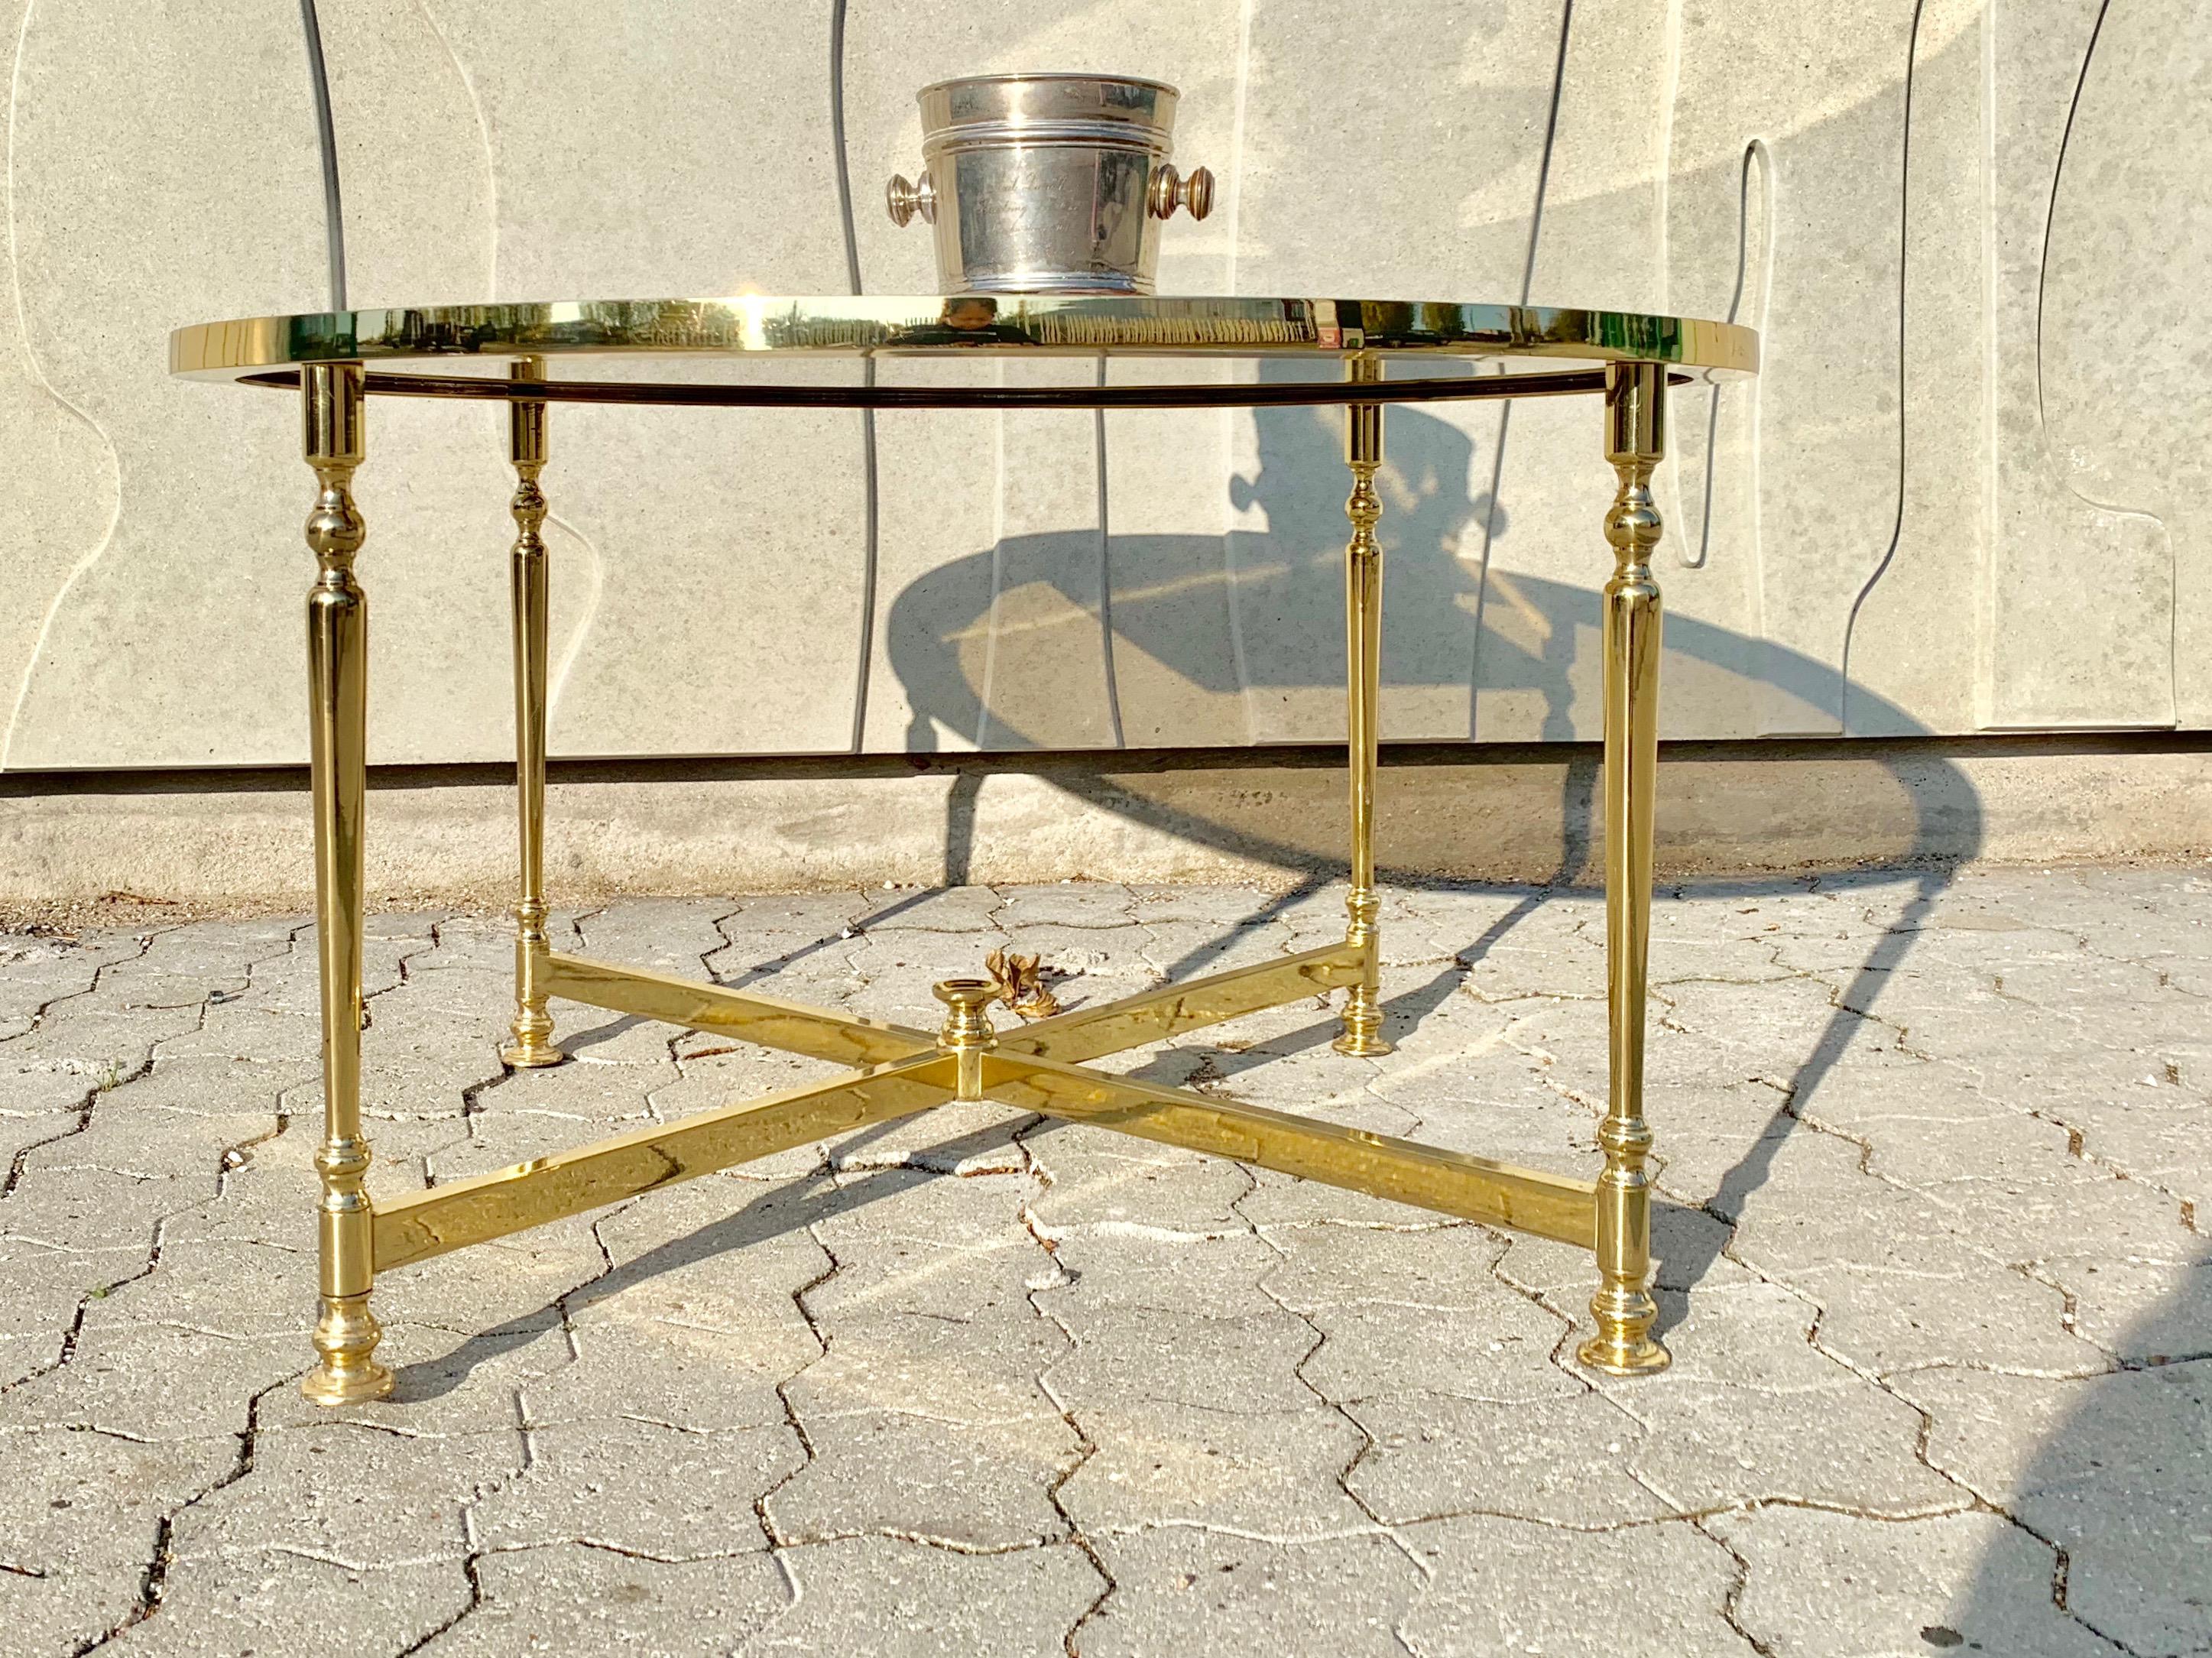 This table by Lysberg, Hansen & Therp Denmark has a solid polished brass structure and a smoked glass plate. The table is rare and have been featured at a few auctions in Denmark.

Lysberg, Hansen & Therp, was purveyor to the royal household of